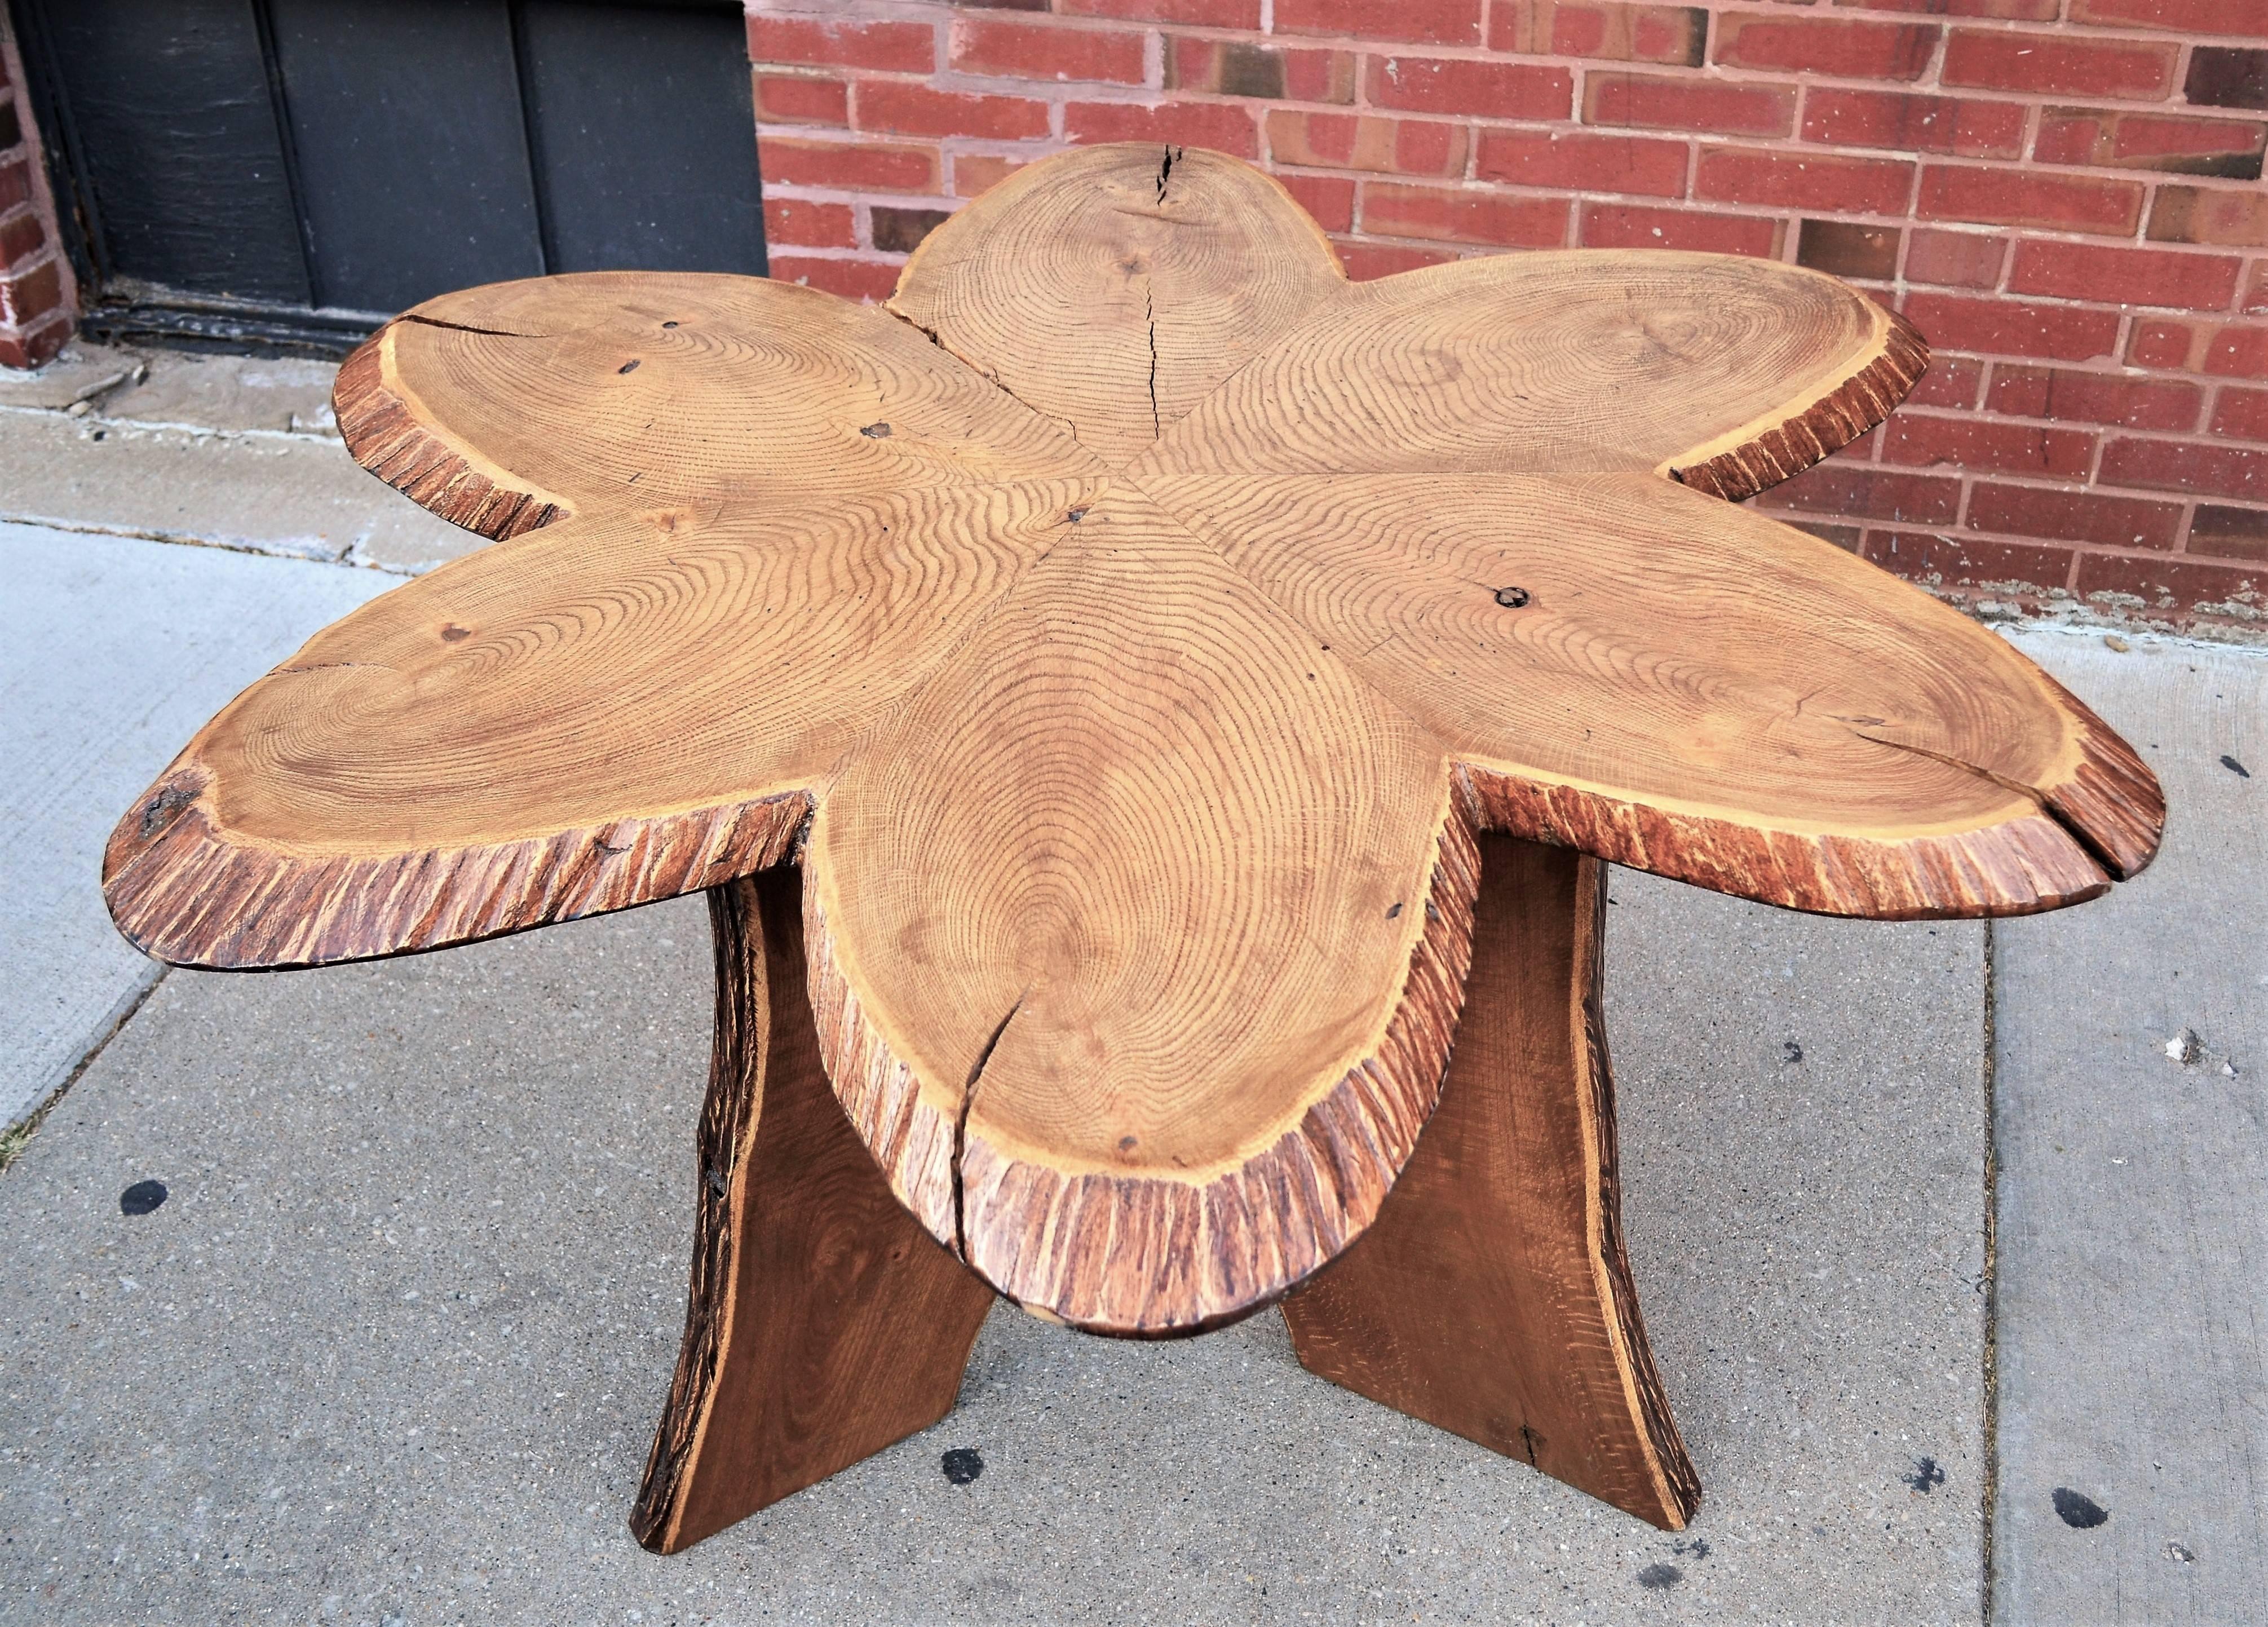 Oak Andironack table.One of a kind six petal folk art table. Undoubtedly commissioned by a master craftsman. Six oak slabs rest on a wood tripod base. There is a separation between two of the top slabs. Please see images. Given its versatile size